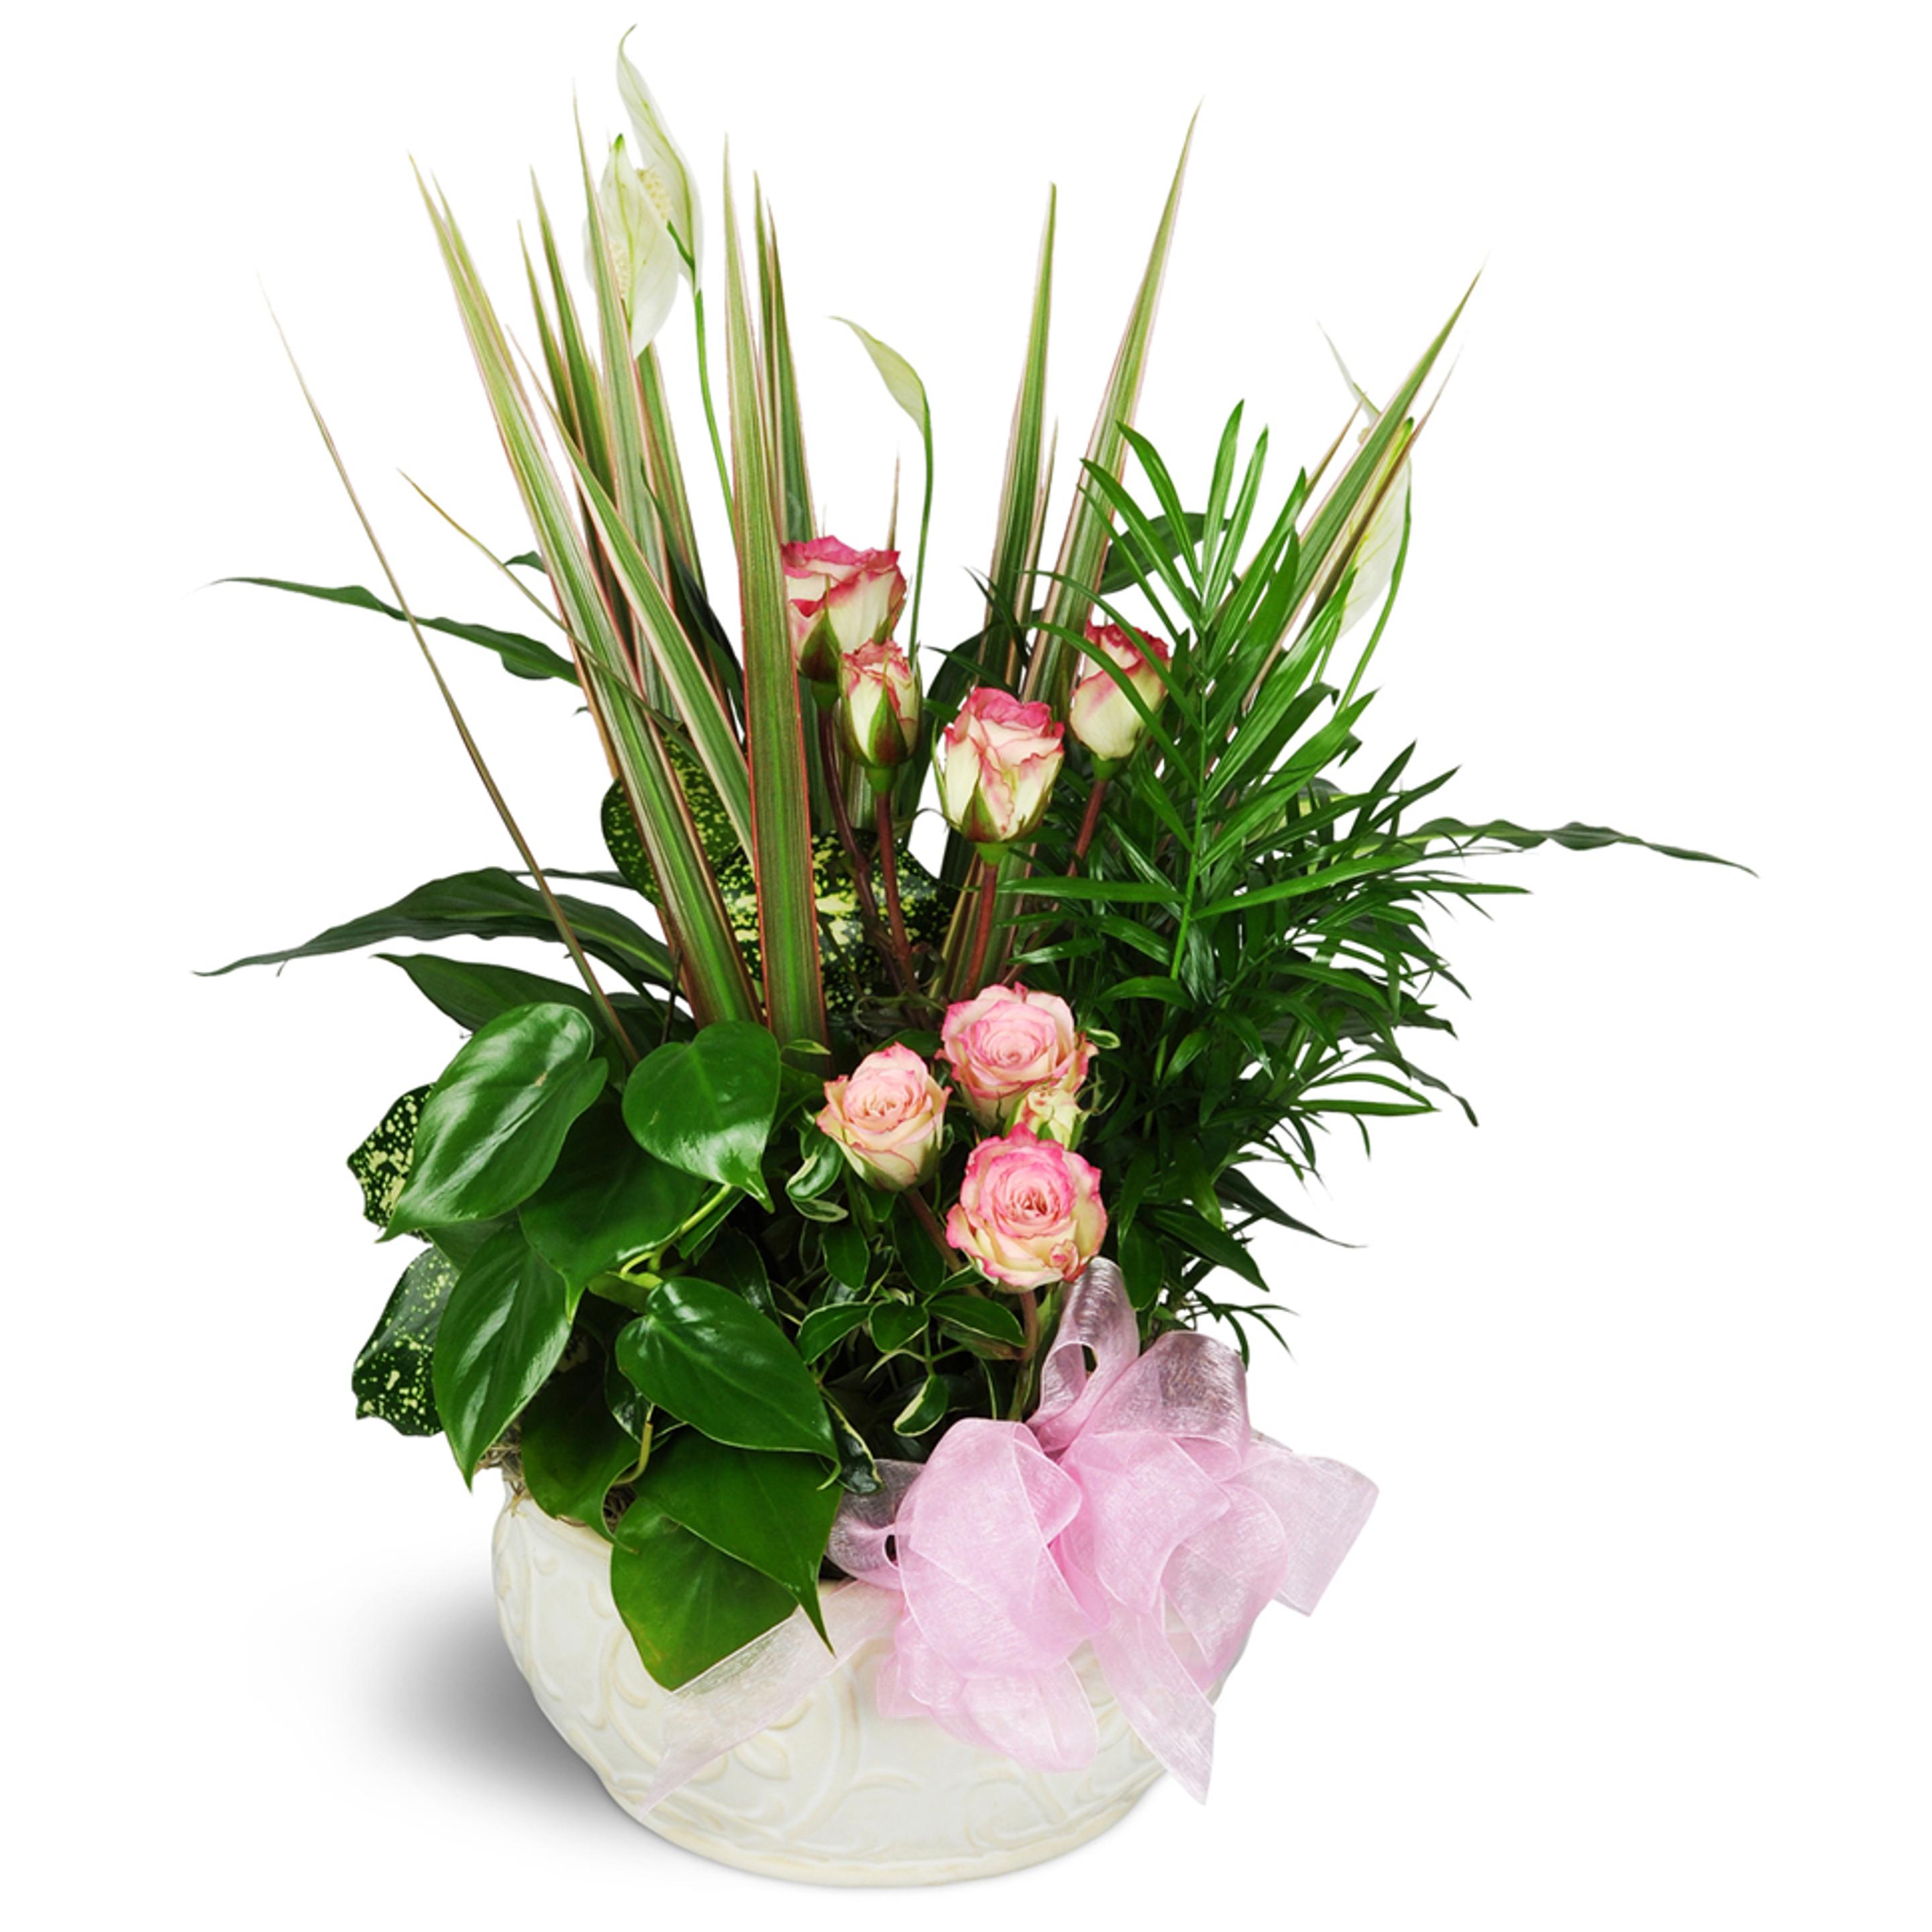 An elegant and thoughtful sympathy plant with comforting greens and pinks with a pink ribbon.